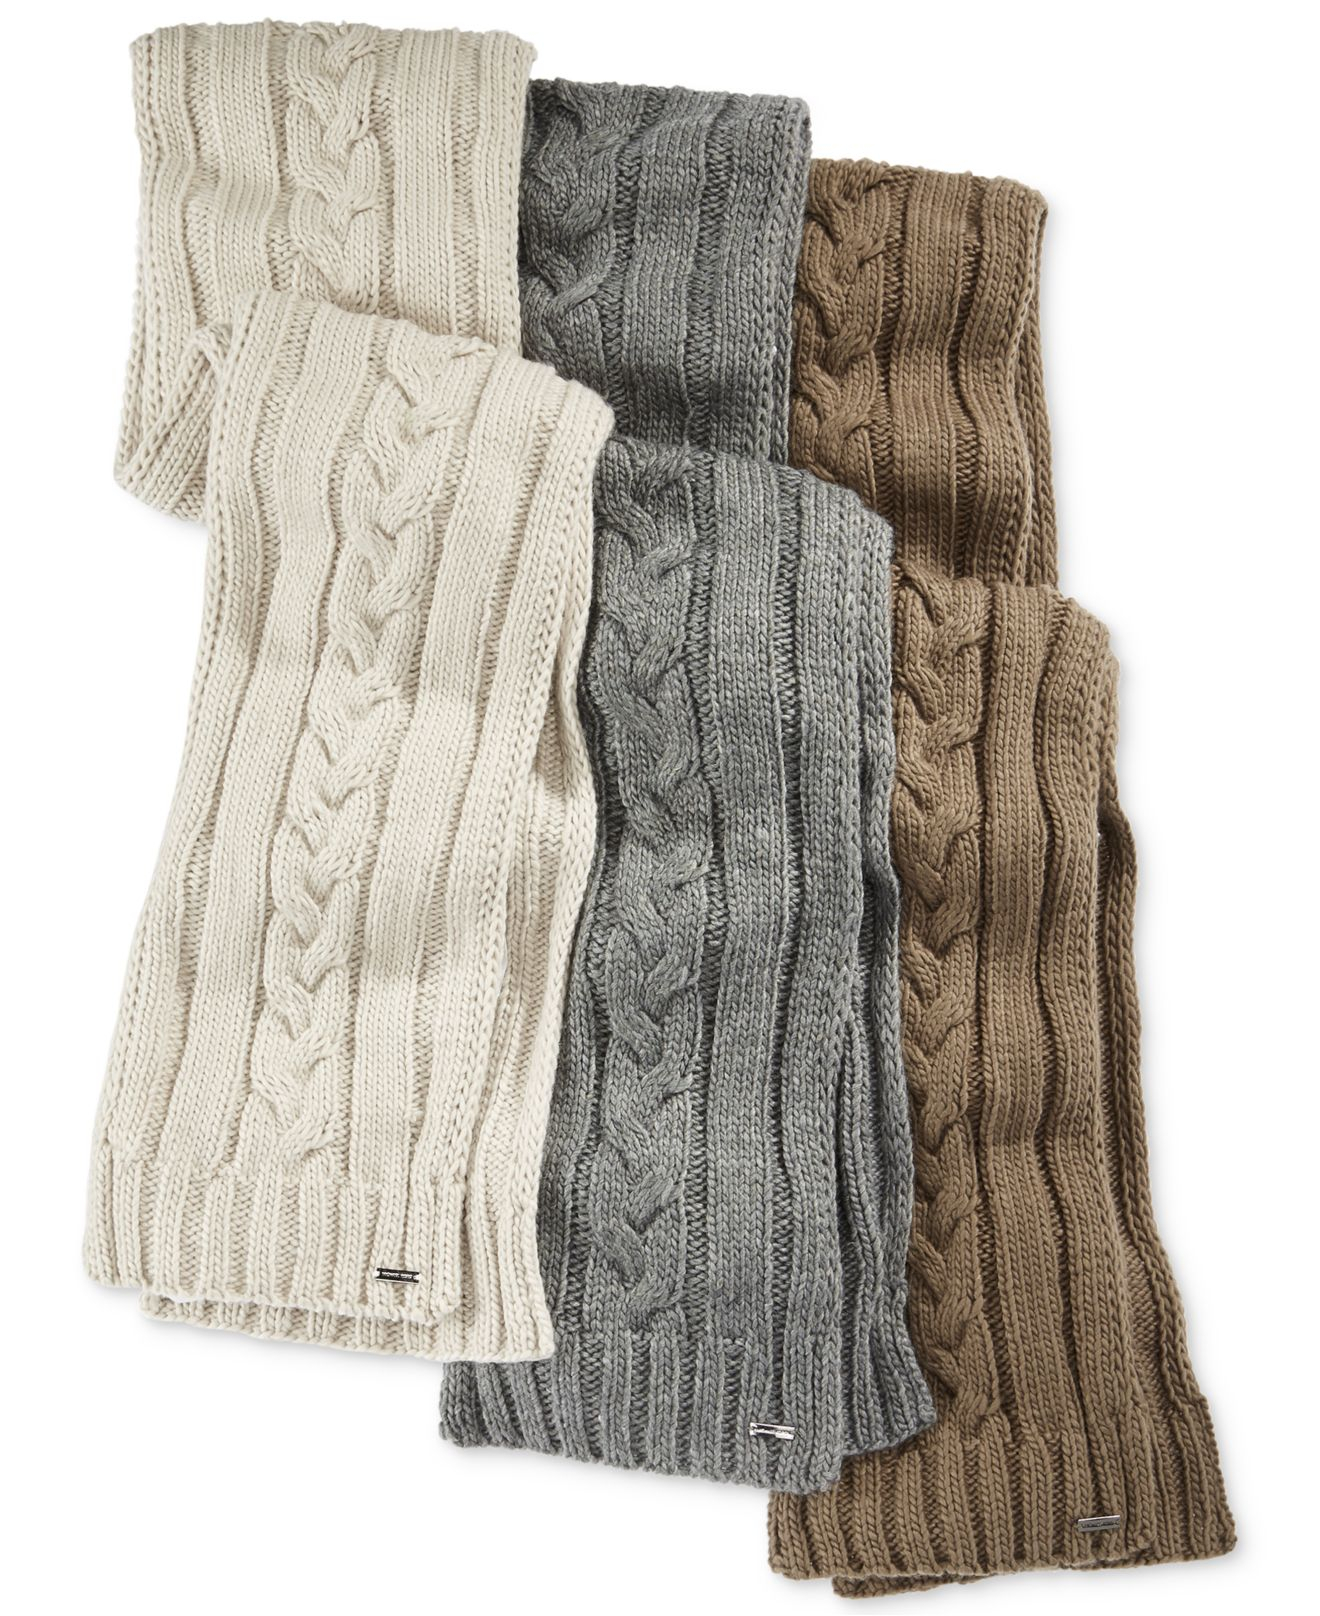 Mens hand knit scarf patterns